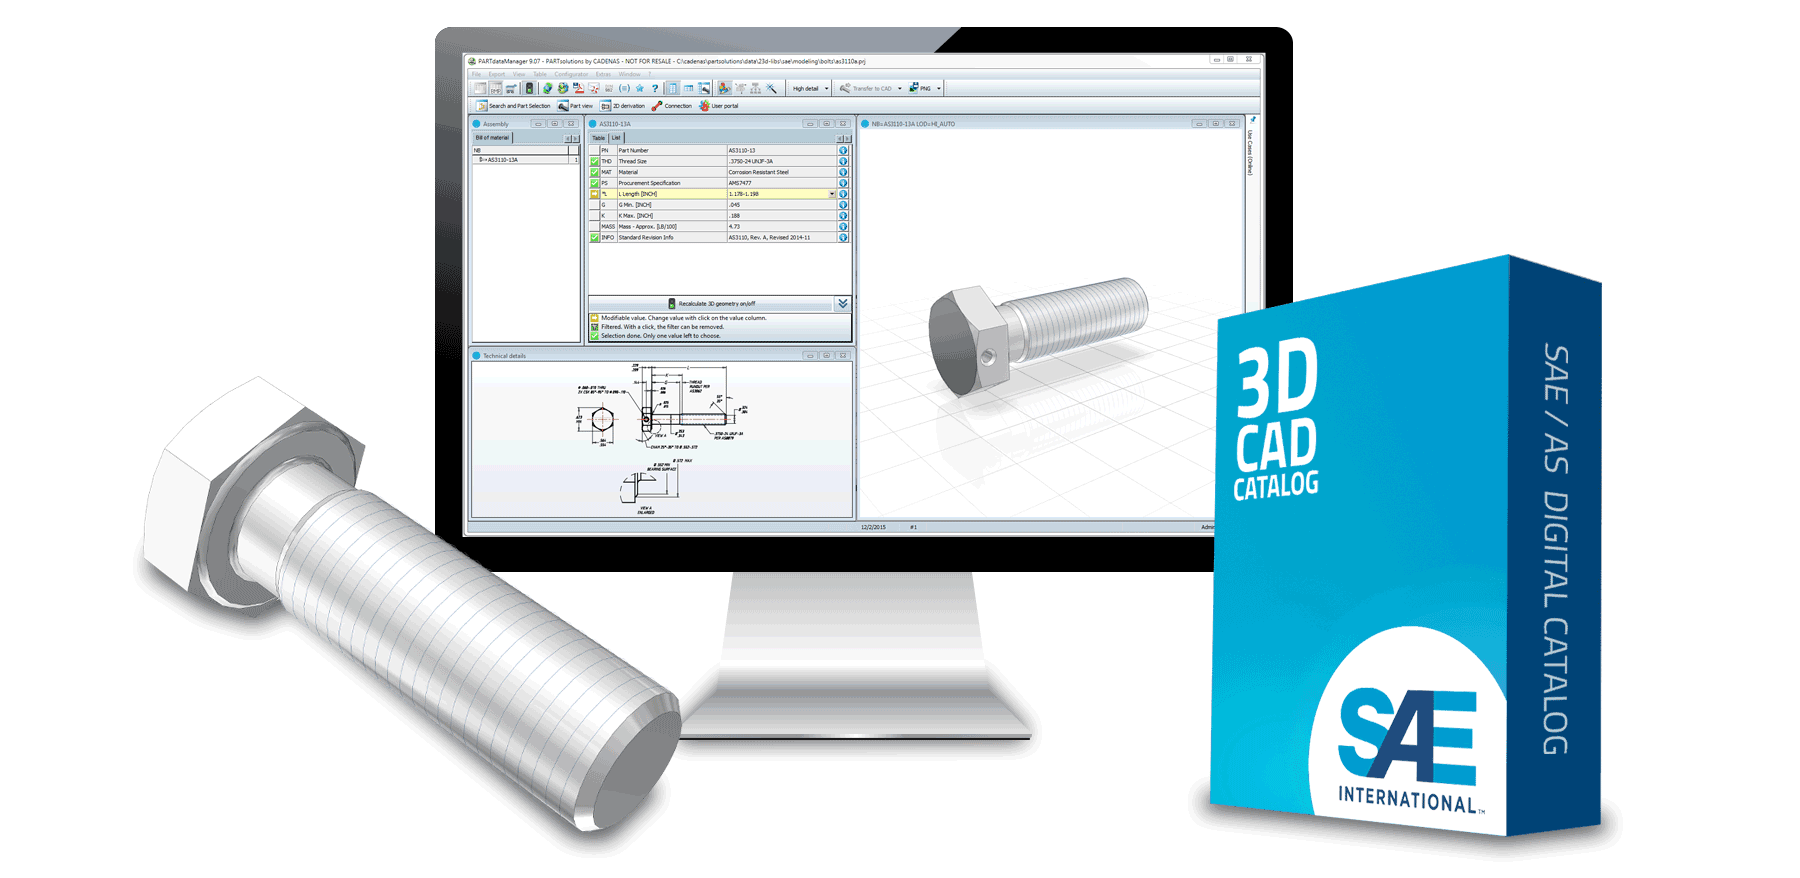 Society of Automotive Engineers (SAE) Launch Authorized 3D CAD Models of Aerospace Standards built by CADENAS PARTsolutions